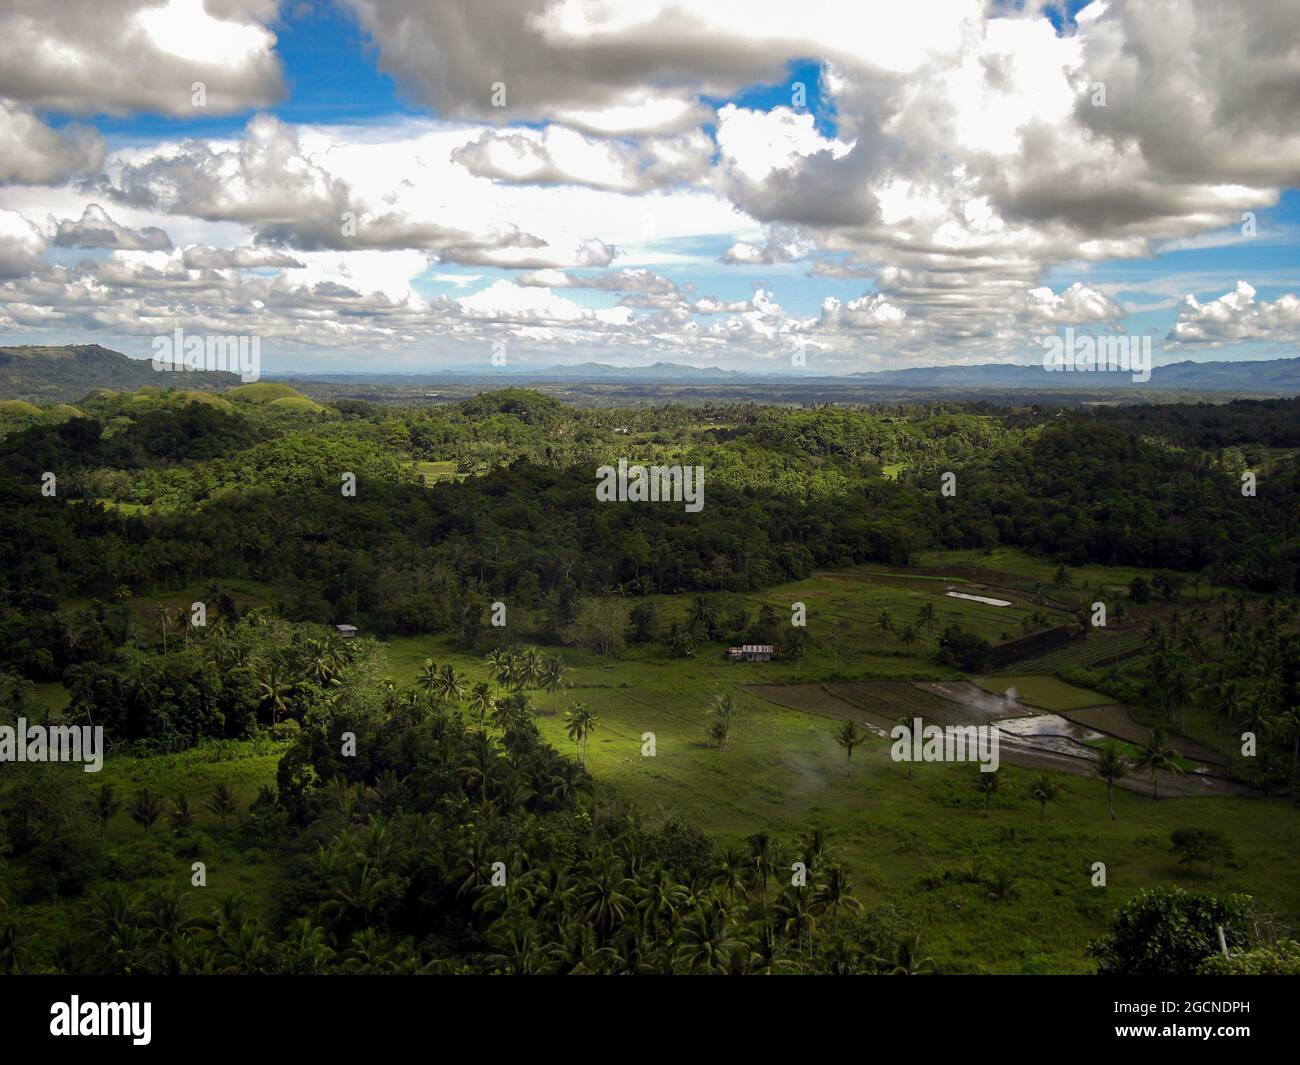 View over the majestic chocolate hills on the island Bohol on the Philippines 19.11.2014 Stock Photo